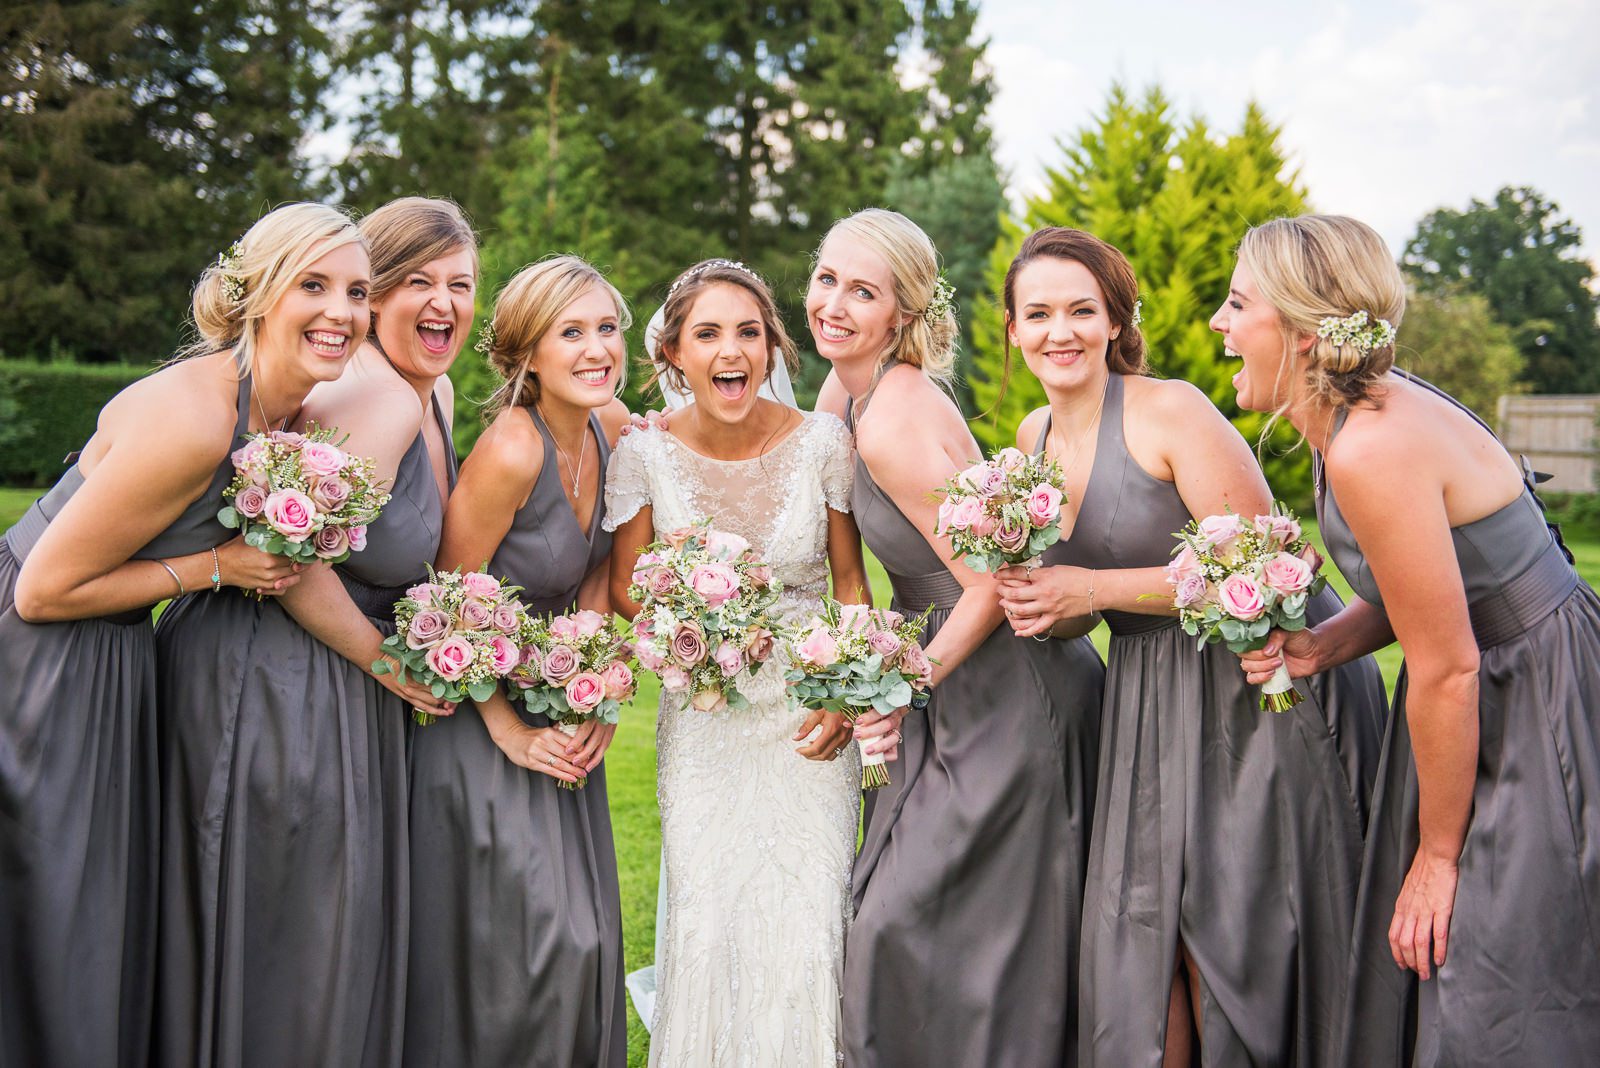 Stylish group shot of the bride and her bridesmaids wearing charcoal grey dresses and carrying pink bouquets..